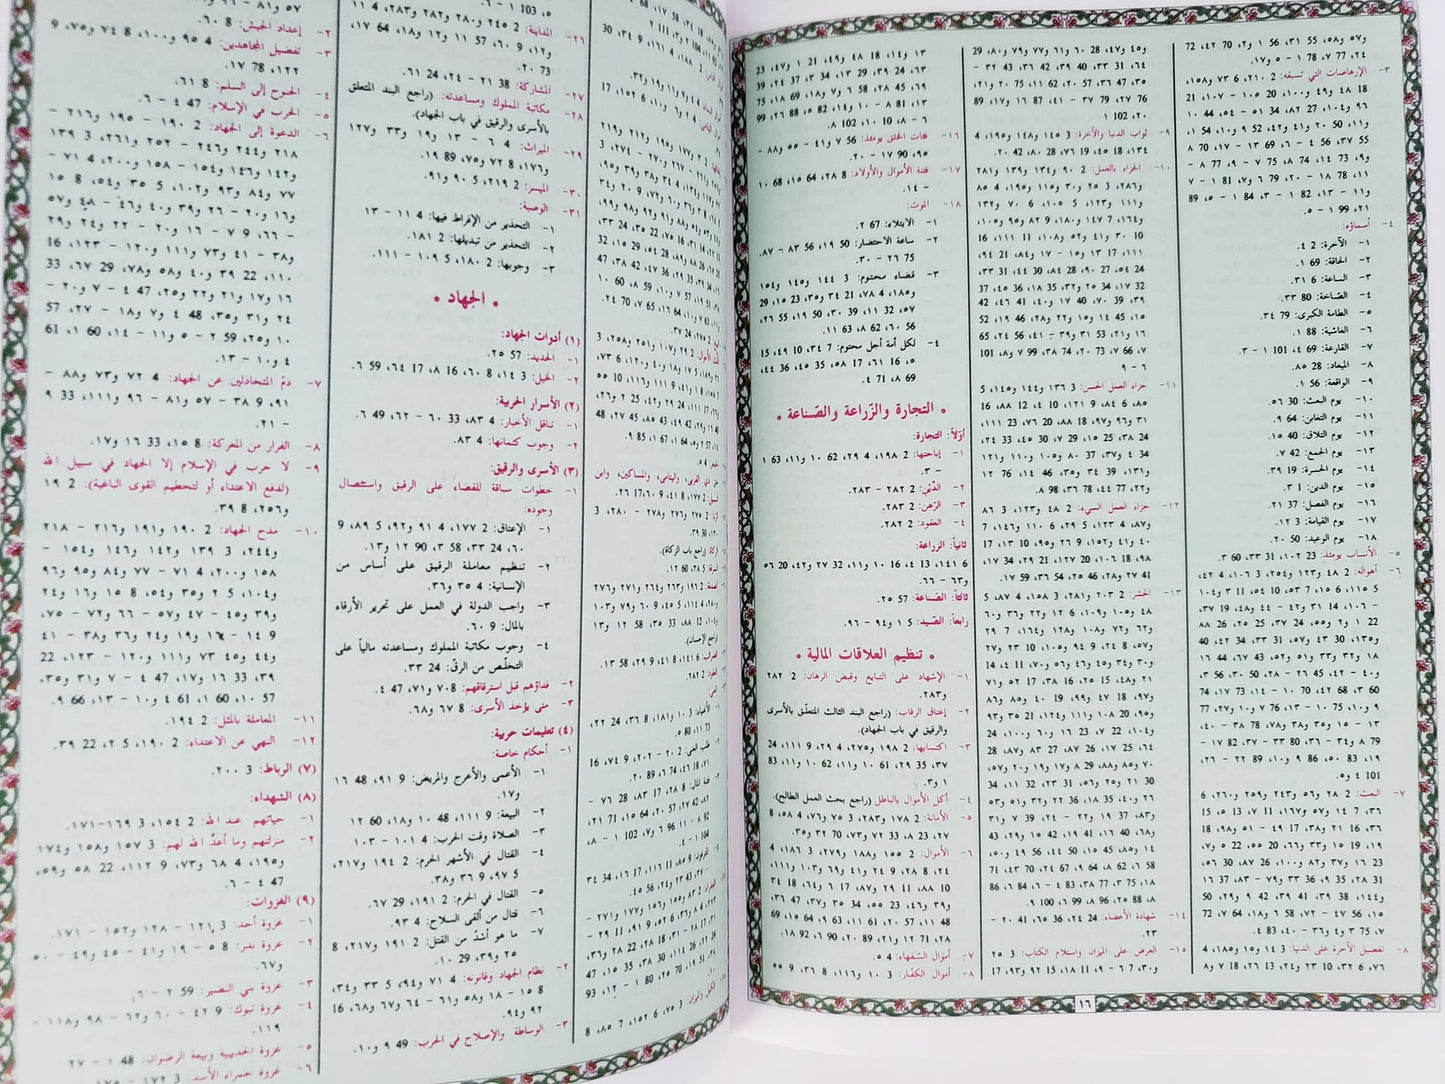 Large Colored Subjects Holy Quran  مصحف التفصيل الموضوعي